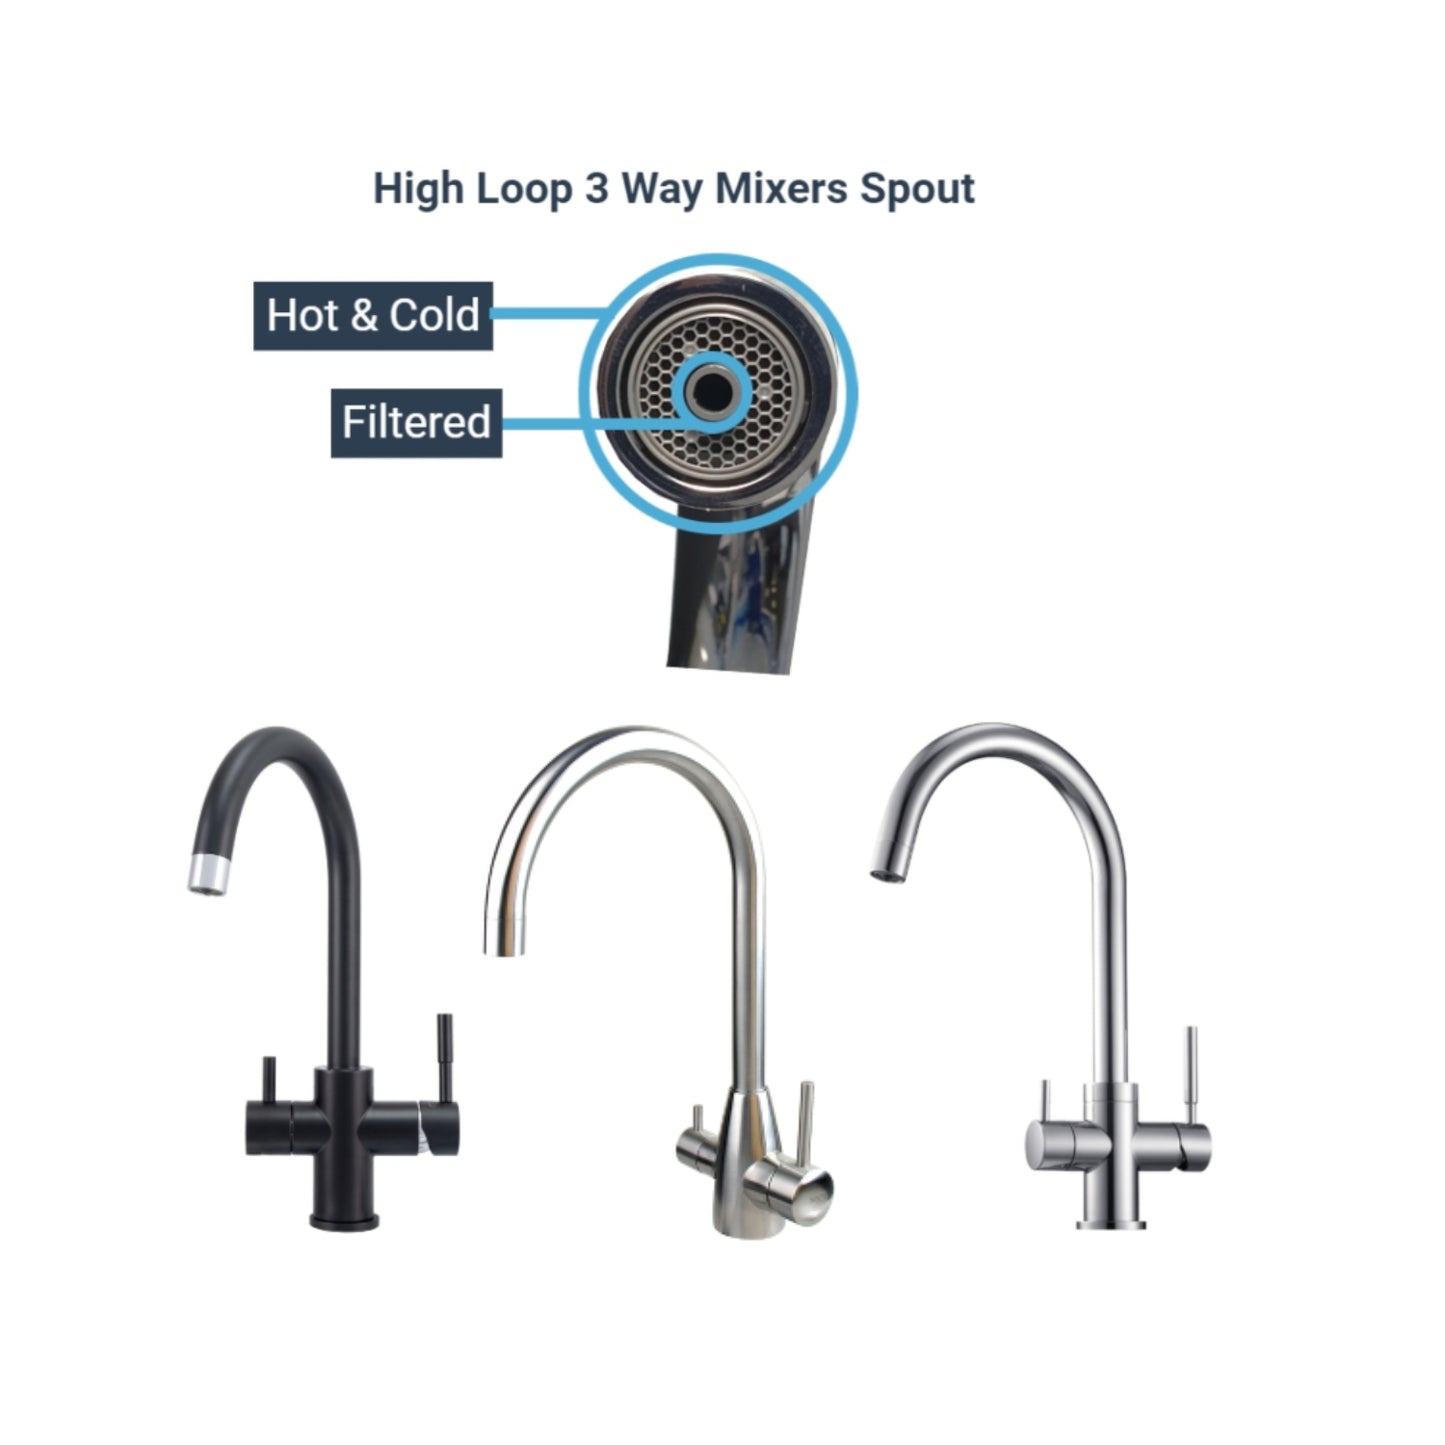 AquaCo Chrome High Loop 3 Way Mixer with LED Filter Change Reminder - Model: 3W-HL-CH